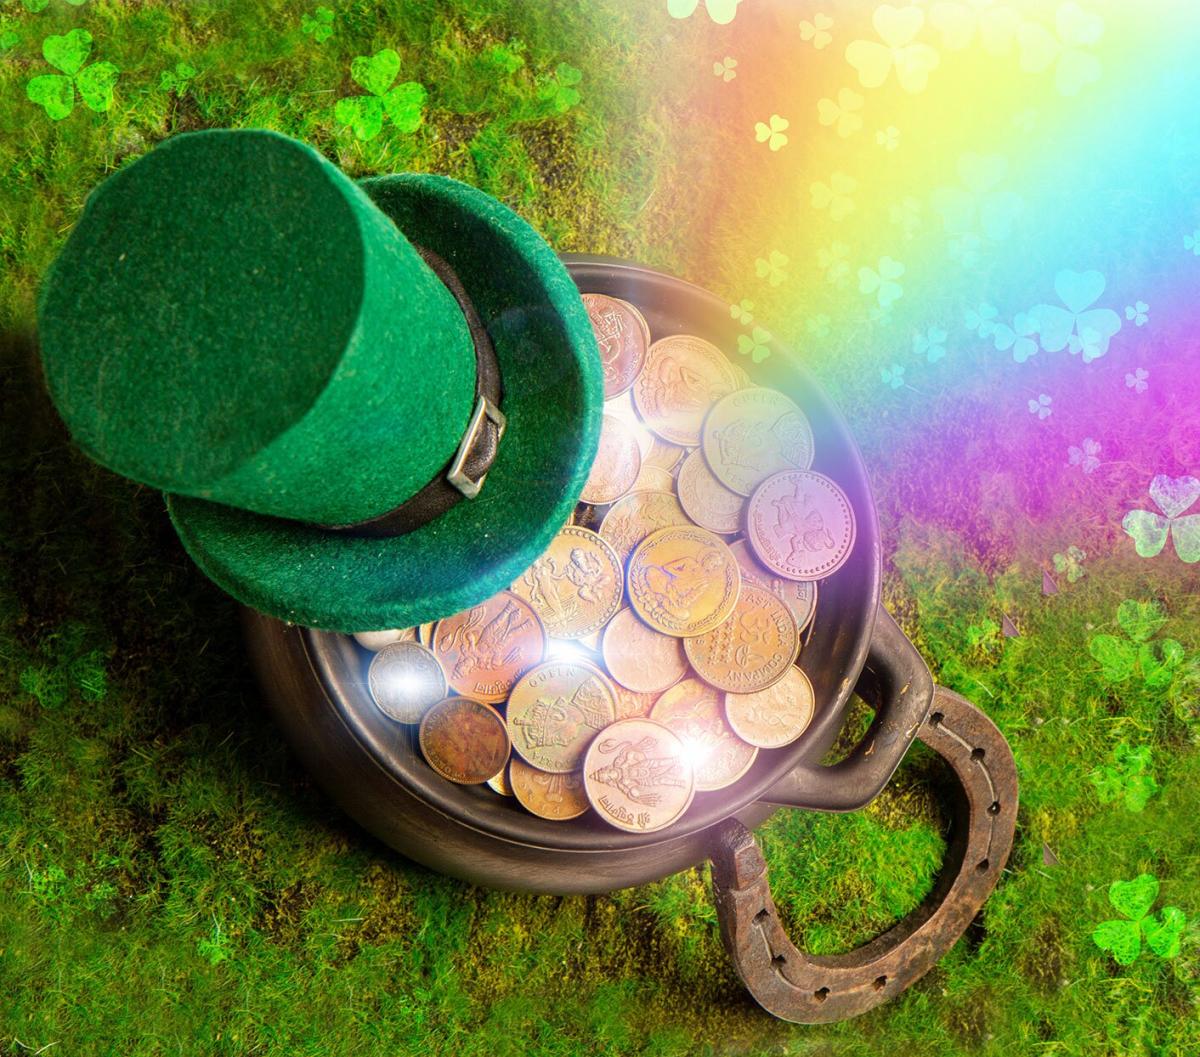 This Is Why Leprechauns Are Associated with St. Patrick's Day